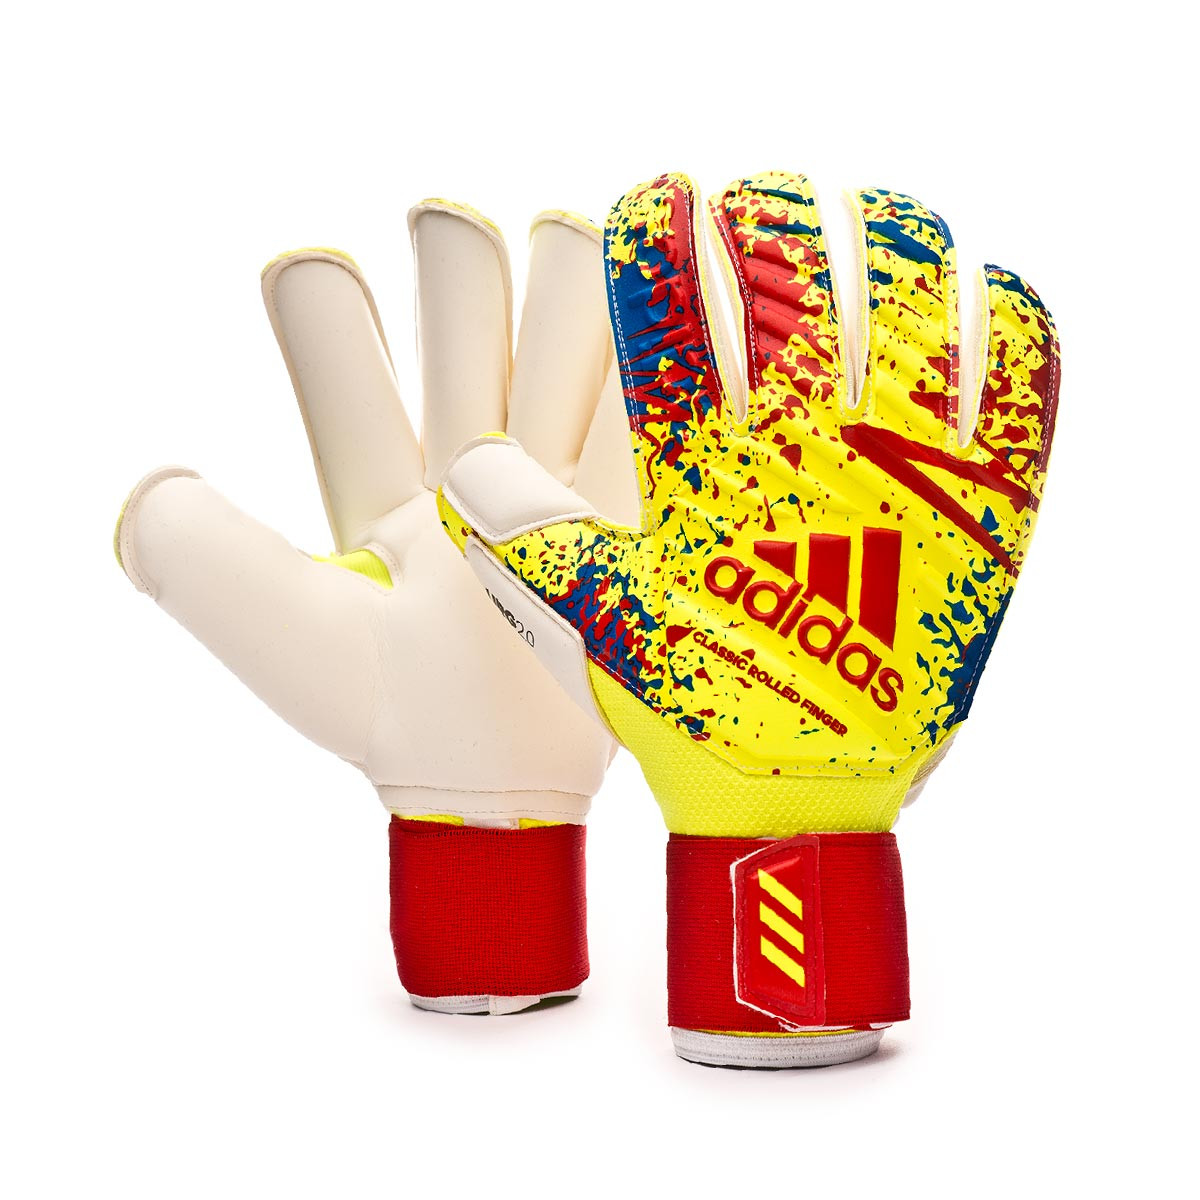 Glove adidas Classic Pro GC Solar yellow-Active red-Football blue -  Football store Fútbol Emotion